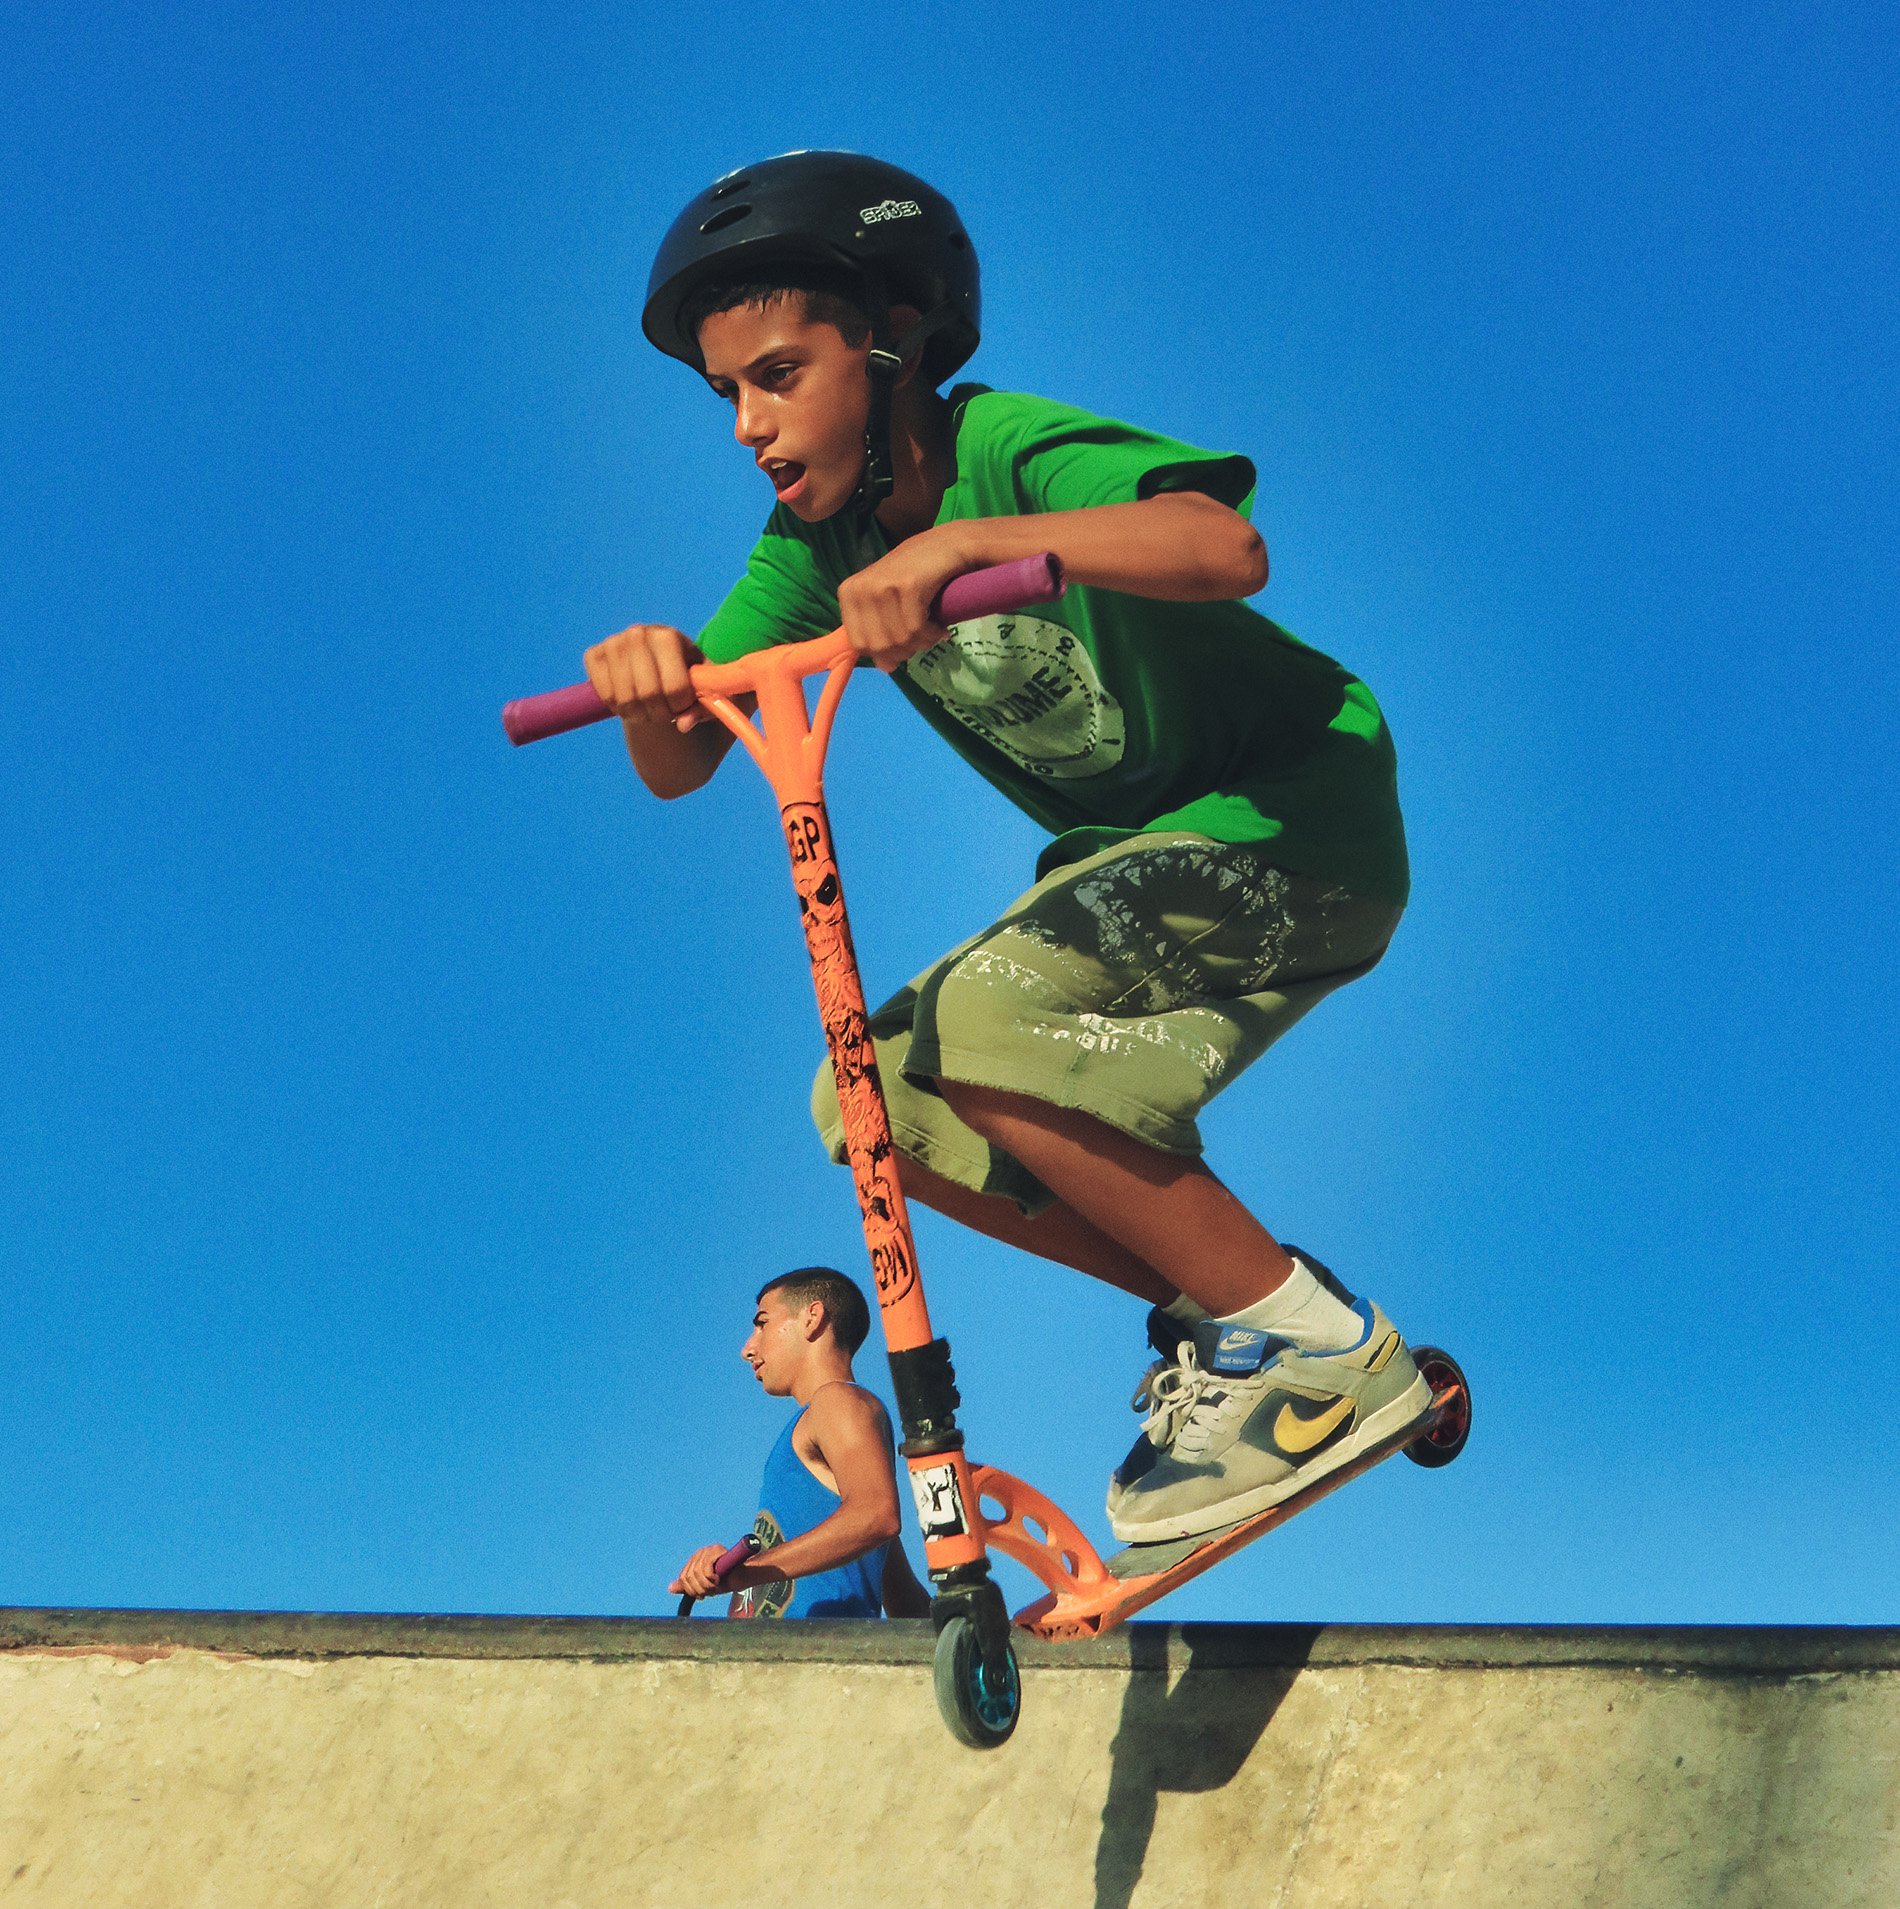 The future of stunt scootering is bright with riders like this one (Photo: Unsplash).